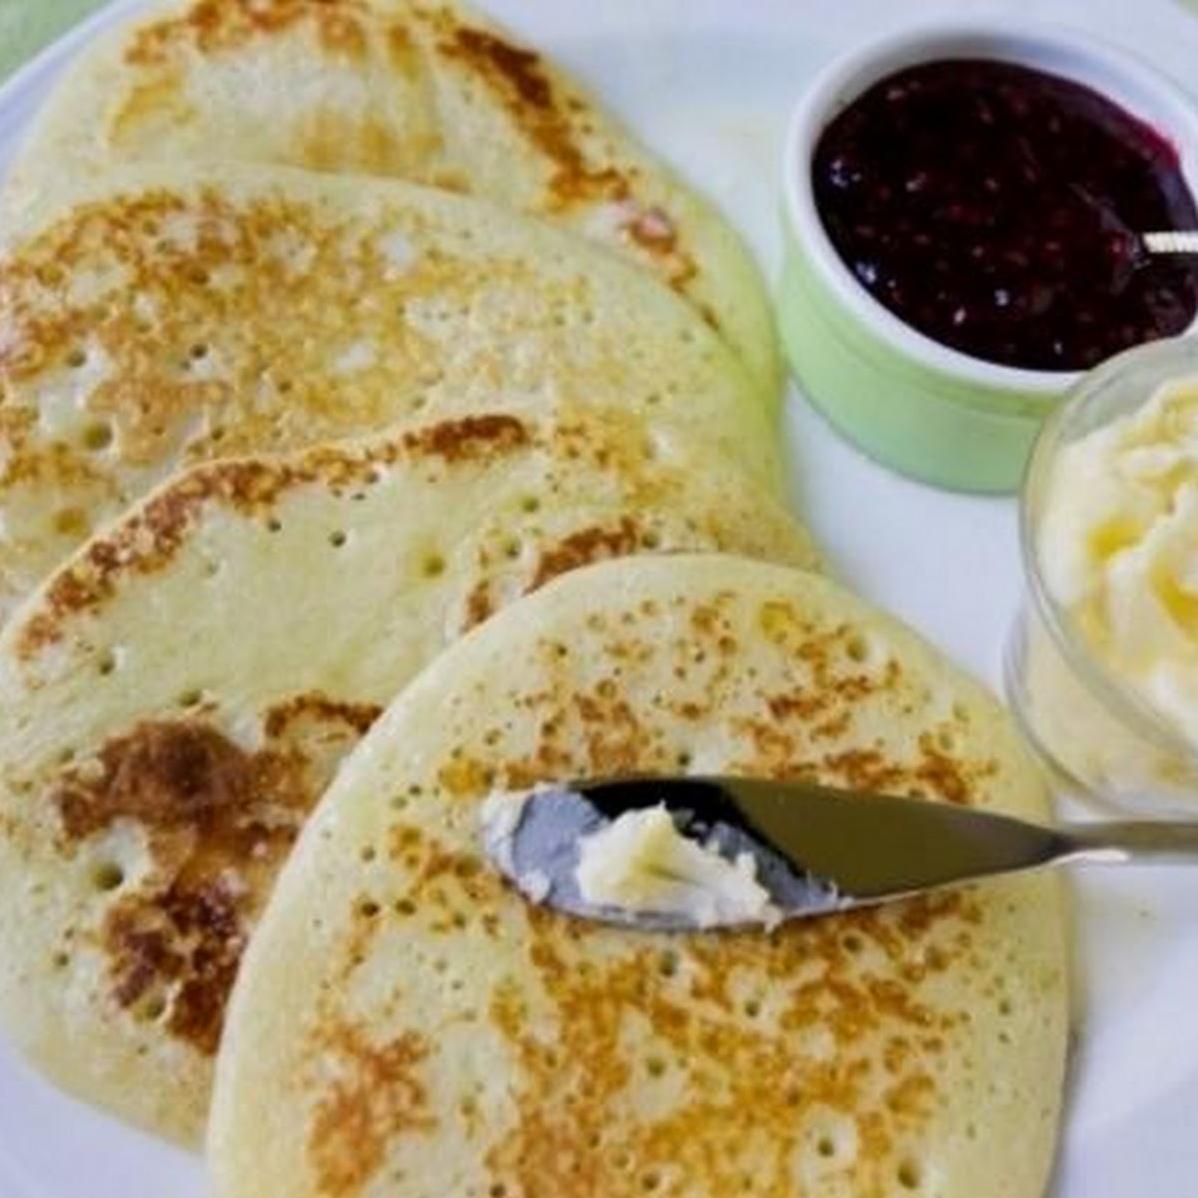  These Scottish pancakes are the perfect breakfast treat.